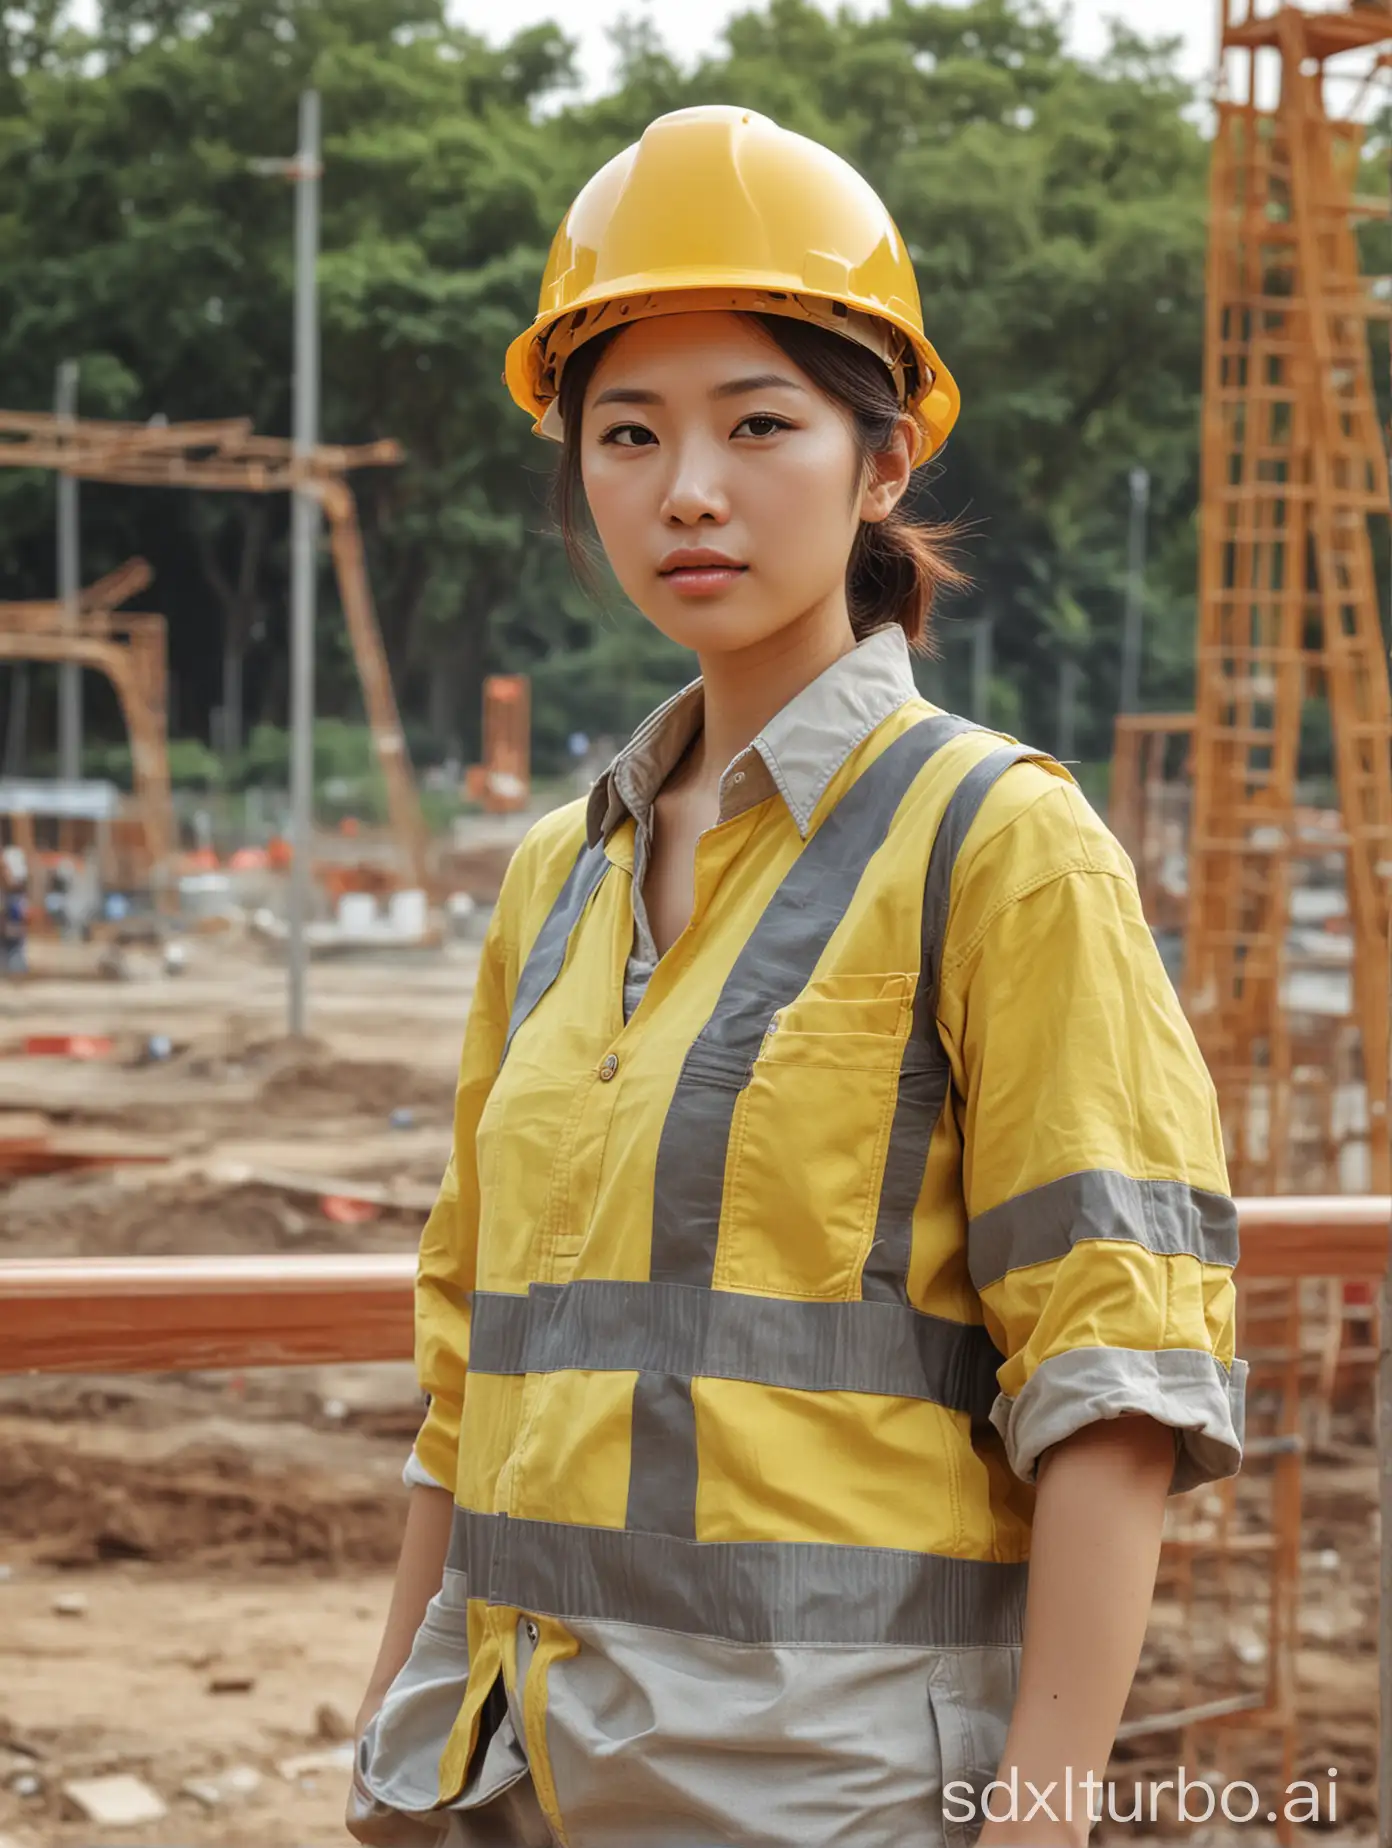 construction site worker's mid-shot, background is park construction site, figure must wear safety helmet, wearing safety clothes, included a Asian person with yellow skin full body appearance